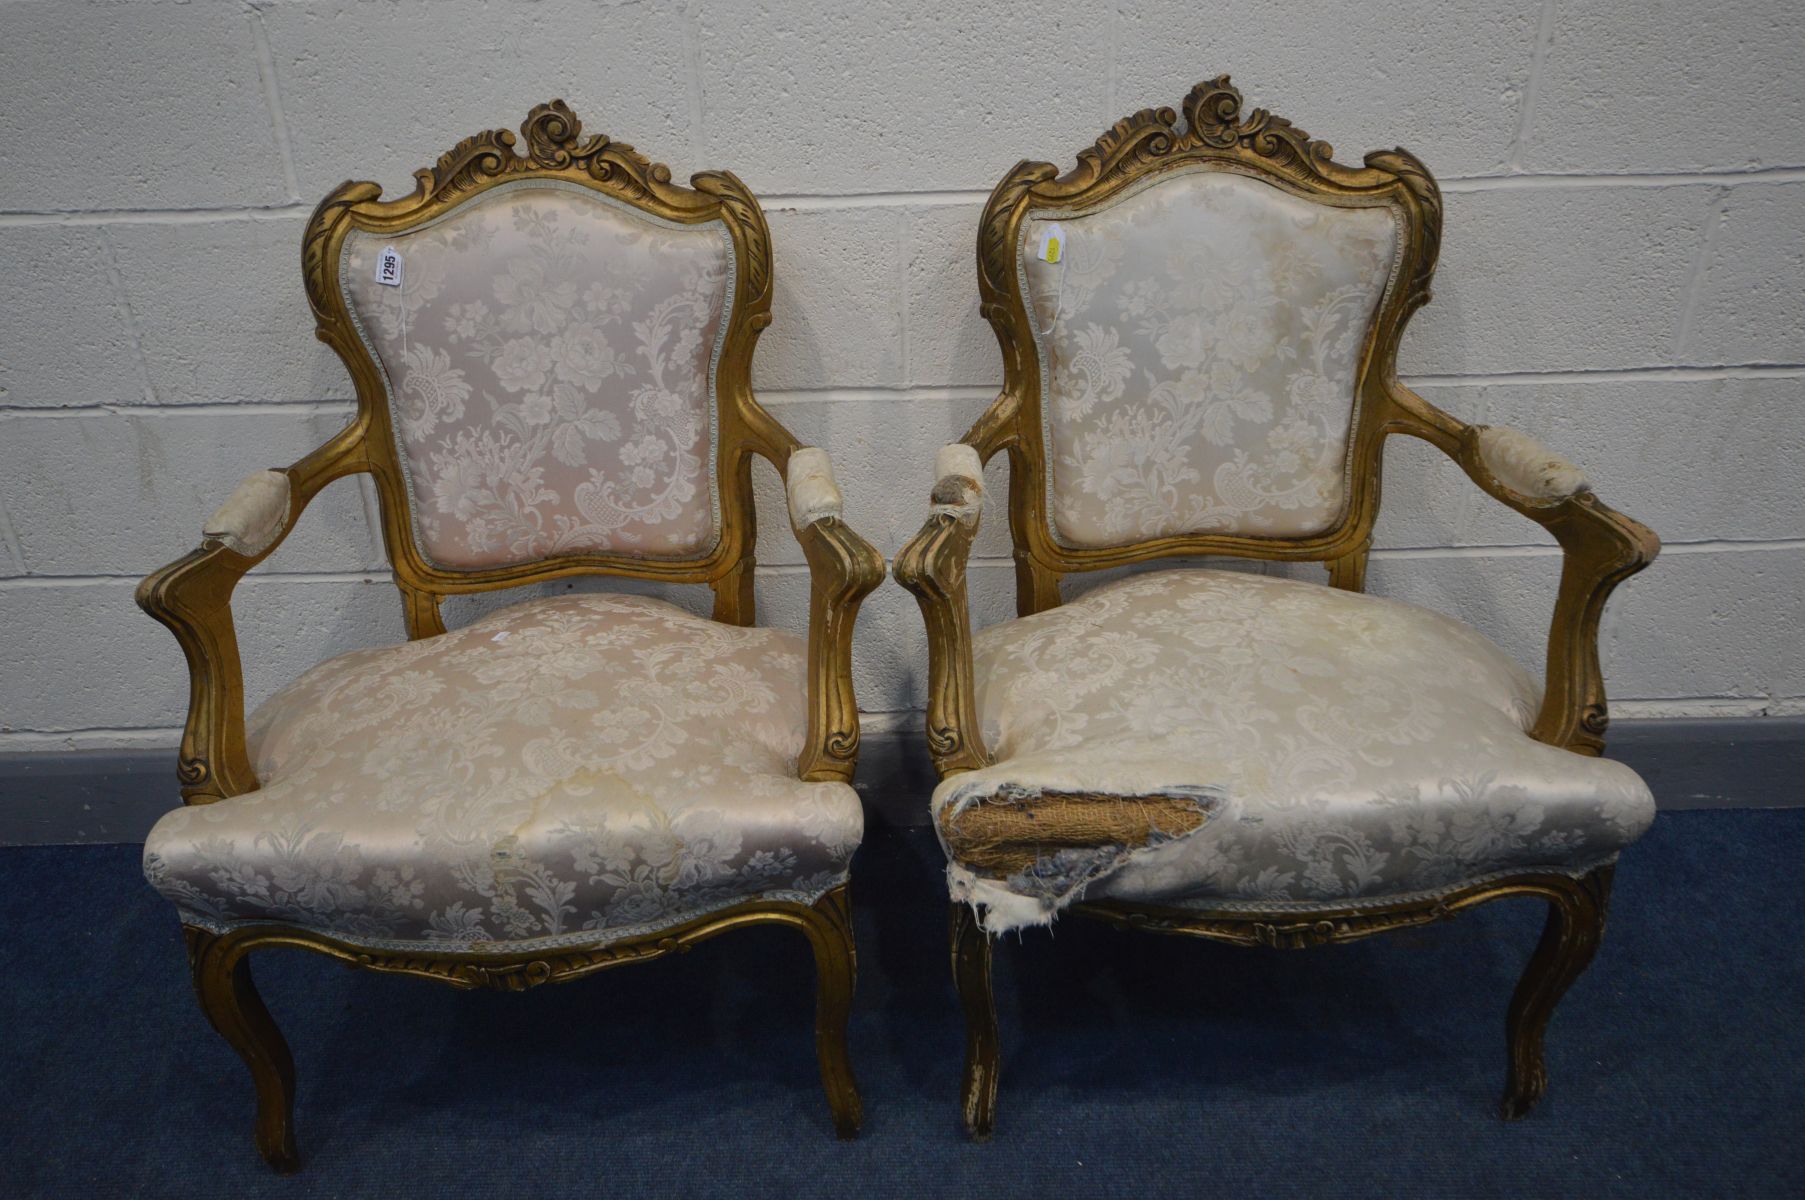 A PAIR OF LOUIS XVI STYLE GILTWOOD OPEN ARMCHAIRS (condition - ideal for restoration)